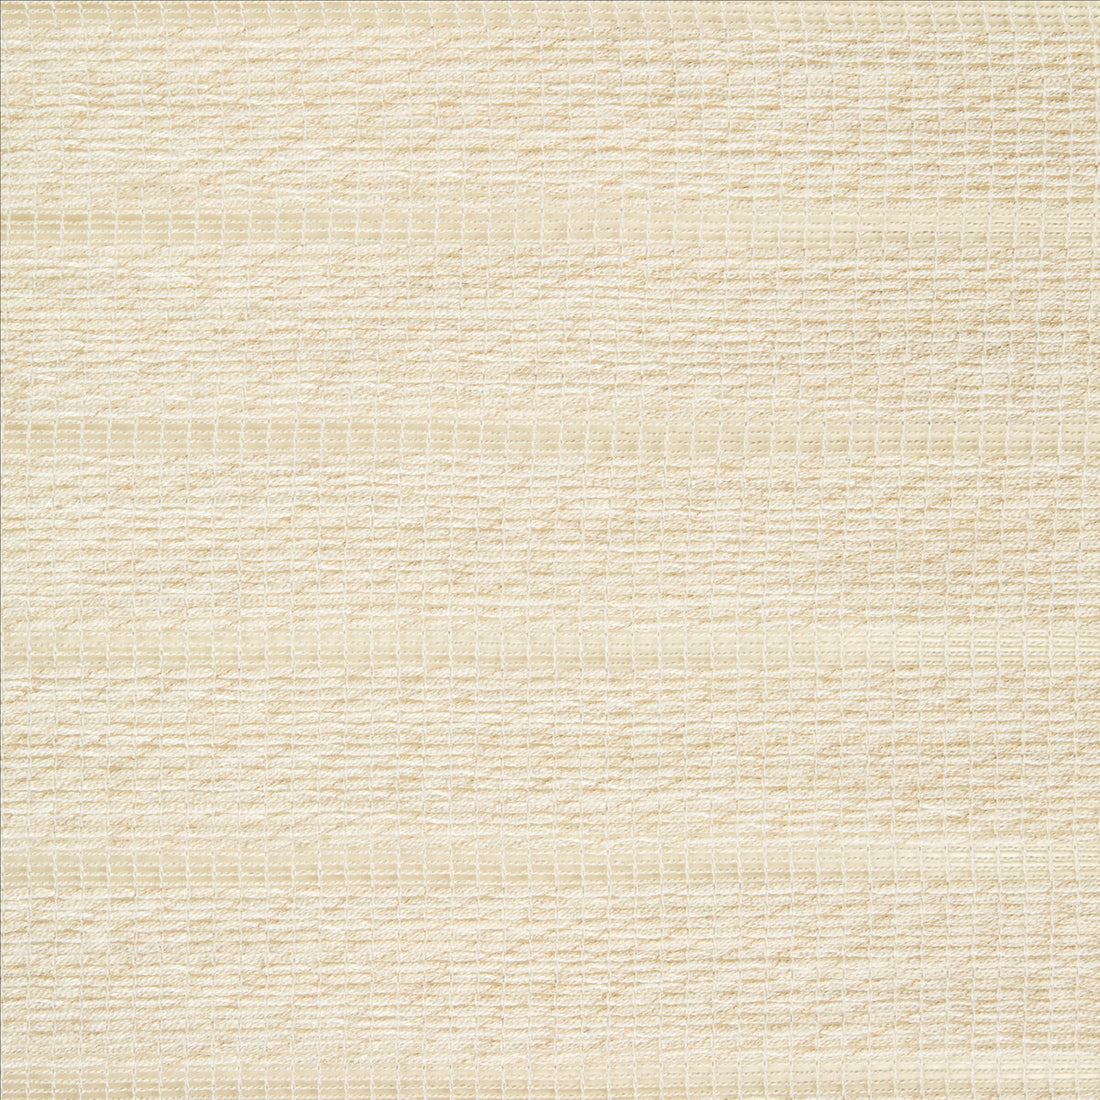 Lungomare fabric in sand color - pattern 4472.16.0 - by Kravet Couture